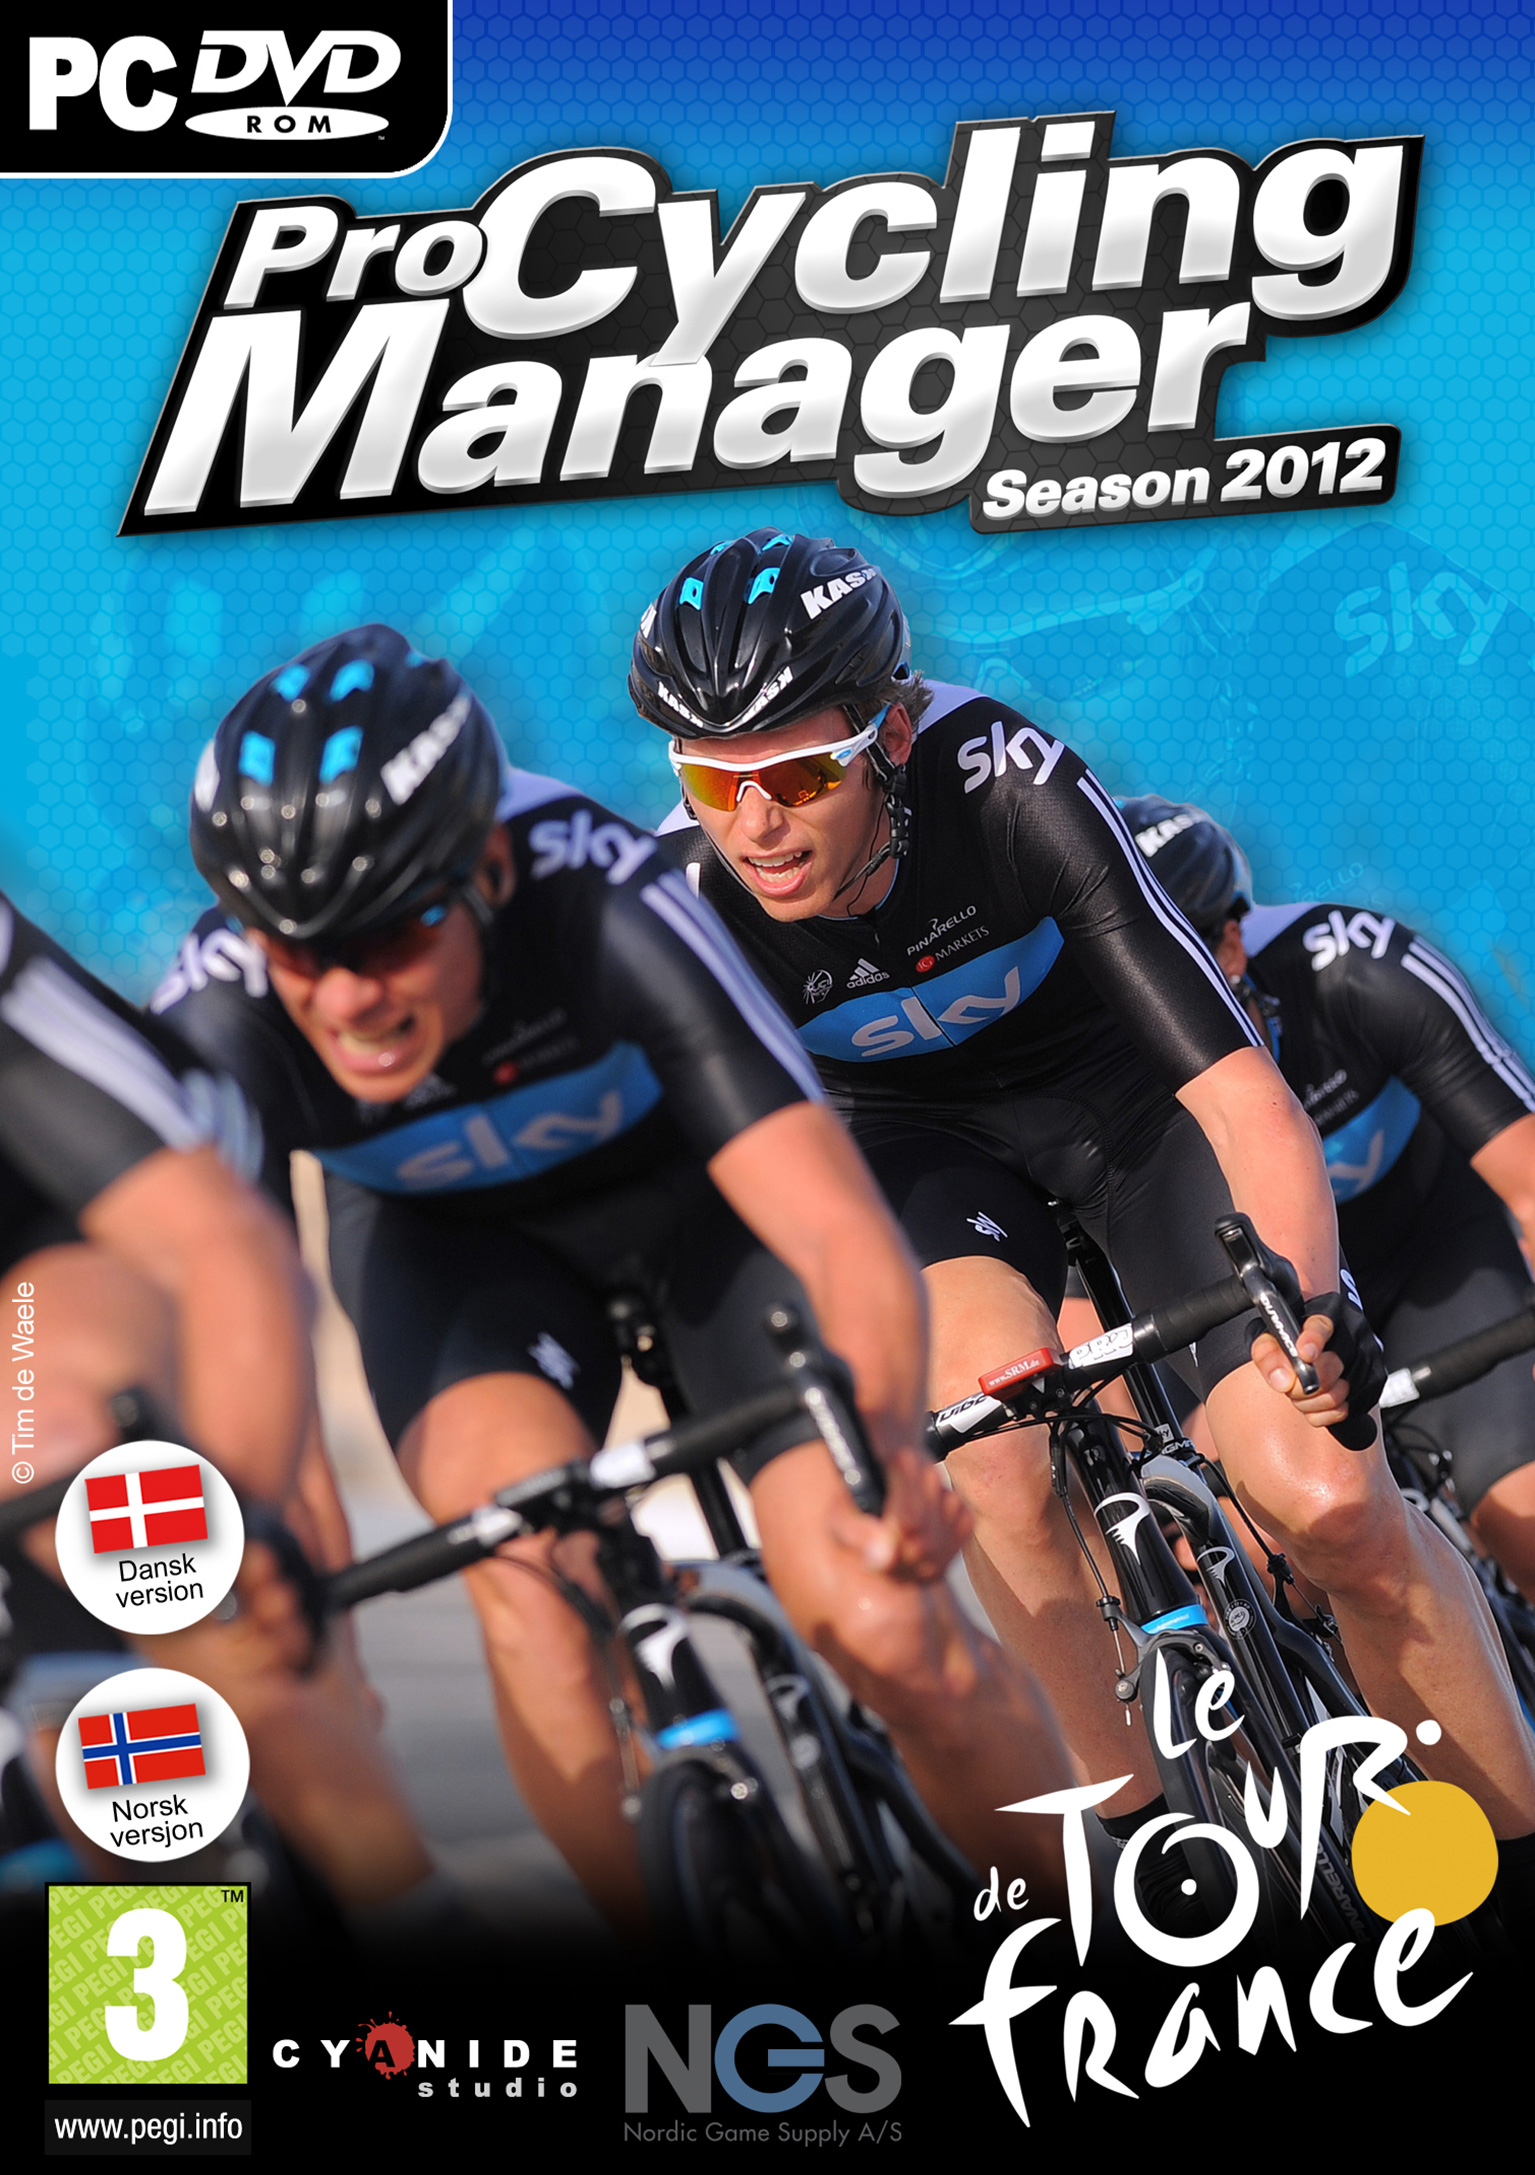 Pro Cycling Manager 2012 - predn DVD obal 2